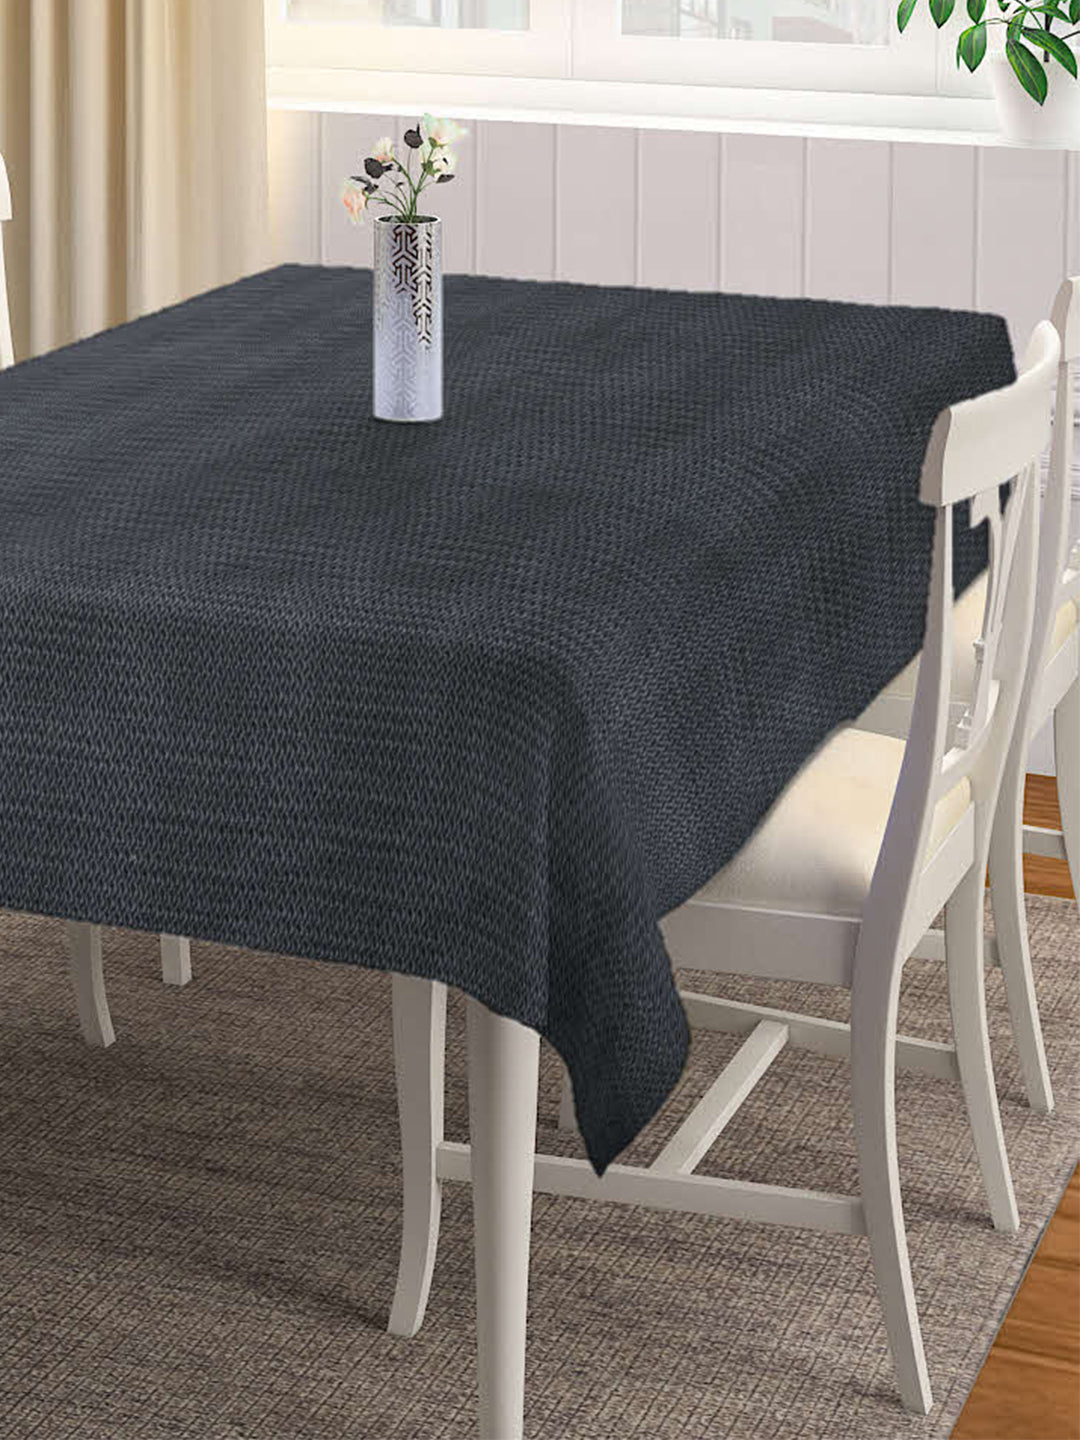 Arrabi Black Solid 100% Handwoven Cotton 8 SEATER Table Cover (220 x 150 cm)